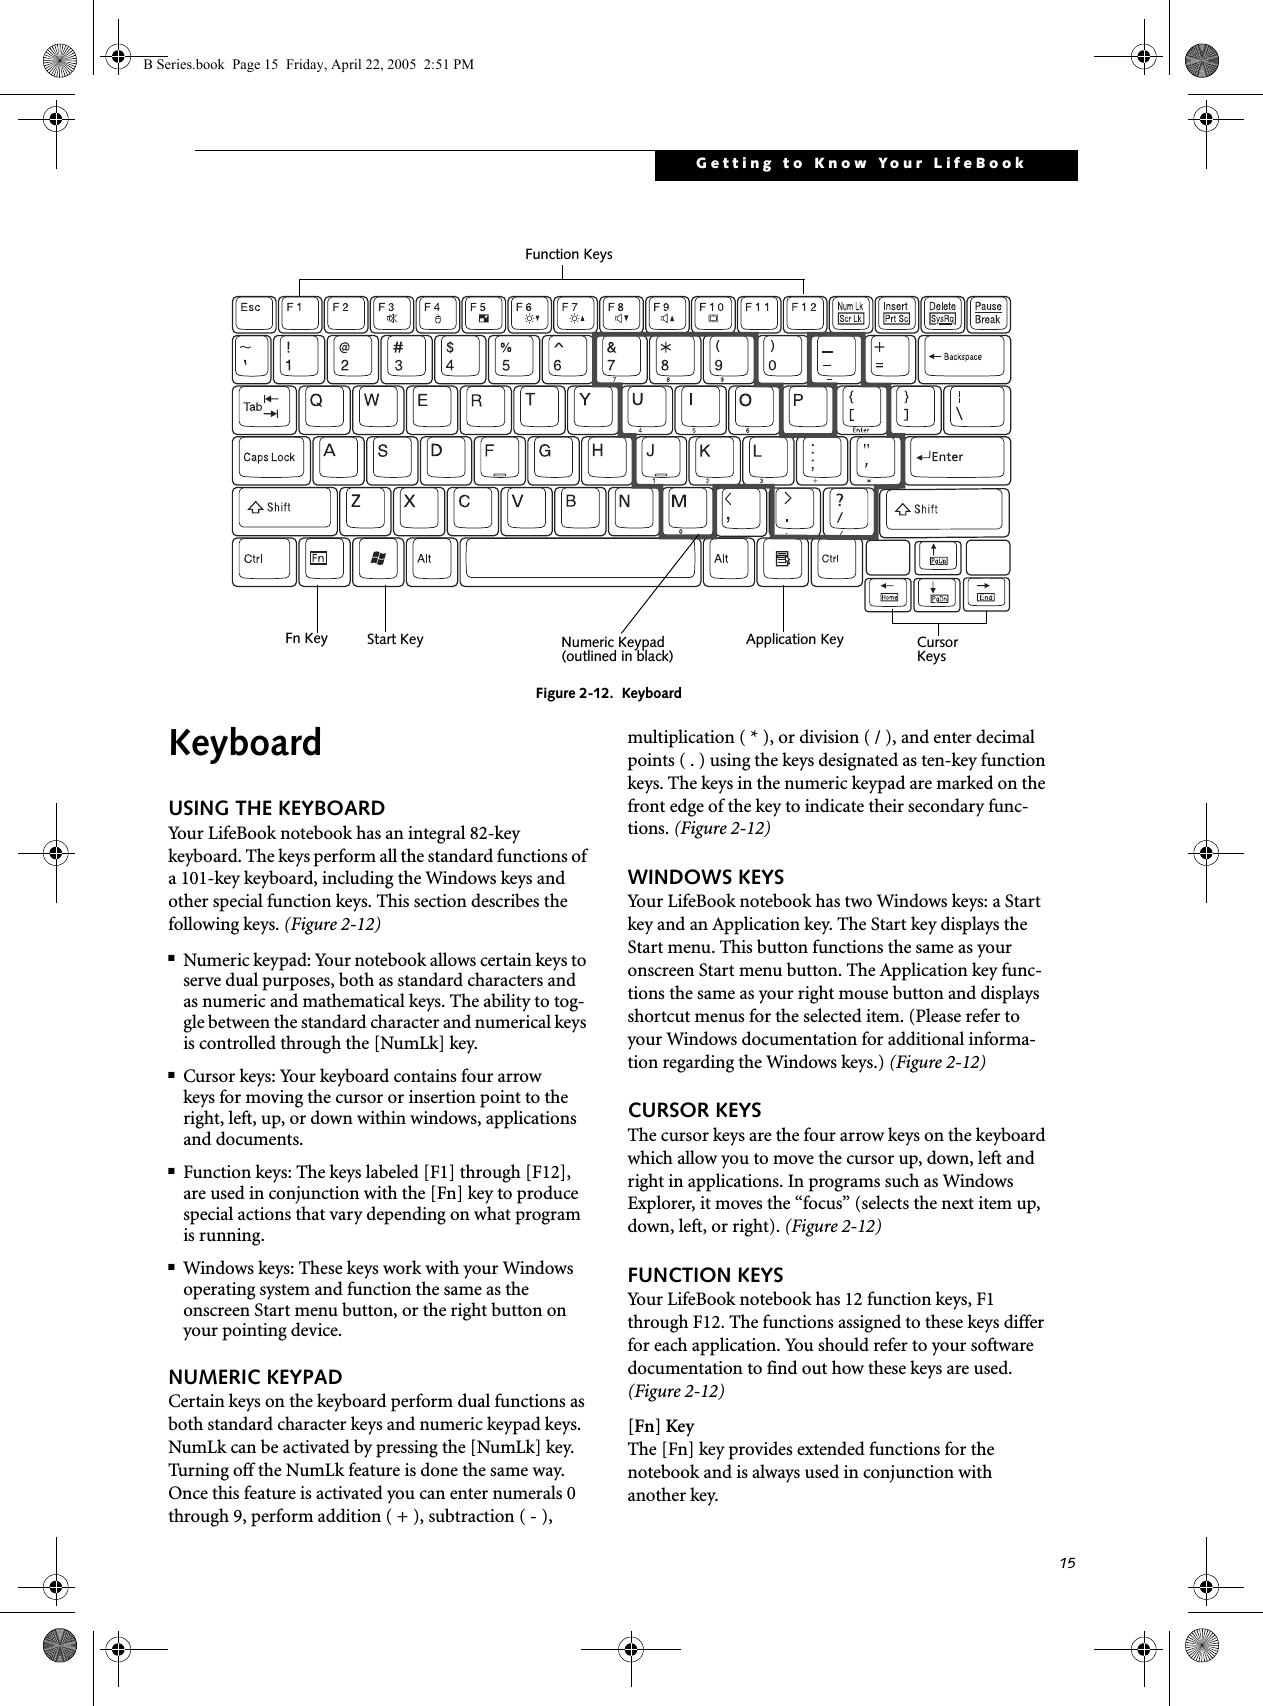 15Getting to Know Your LifeBookFigure 2-12.  KeyboardKeyboardUSING THE KEYBOARDYour LifeBook notebook has an integral 82-key keyboard. The keys perform all the standard functions of a 101-key keyboard, including the Windows keys and other special function keys. This section describes the following keys. (Figure 2-12)■Numeric keypad: Your notebook allows certain keys to serve dual purposes, both as standard characters and as numeric and mathematical keys. The ability to tog-gle between the standard character and numerical keys is controlled through the [NumLk] key.■Cursor keys: Your keyboard contains four arrowkeys for moving the cursor or insertion point to the right, left, up, or down within windows, applications and documents. ■Function keys: The keys labeled [F1] through [F12], are used in conjunction with the [Fn] key to produce special actions that vary depending on what program is running. ■Windows keys: These keys work with your Windows operating system and function the same as the onscreen Start menu button, or the right button on your pointing device.NUMERIC KEYPADCertain keys on the keyboard perform dual functions as both standard character keys and numeric keypad keys. NumLk can be activated by pressing the [NumLk] key. Turning off the NumLk feature is done the same way. Once this feature is activated you can enter numerals 0 through 9, perform addition ( + ), subtraction ( - ),multiplication ( * ), or division ( / ), and enter decimal points ( . ) using the keys designated as ten-key function keys. The keys in the numeric keypad are marked on the front edge of the key to indicate their secondary func-tions. (Figure 2-12) WINDOWS KEYSYour LifeBook notebook has two Windows keys: a Start key and an Application key. The Start key displays the Start menu. This button functions the same as your onscreen Start menu button. The Application key func-tions the same as your right mouse button and displays shortcut menus for the selected item. (Please refer to your Windows documentation for additional informa-tion regarding the Windows keys.) (Figure 2-12)CURSOR KEYSThe cursor keys are the four arrow keys on the keyboard which allow you to move the cursor up, down, left and right in applications. In programs such as Windows Explorer, it moves the “focus” (selects the next item up, down, left, or right). (Figure 2-12)FUNCTION KEYSYour LifeBook notebook has 12 function keys, F1 through F12. The functions assigned to these keys differ for each application. You should refer to your software documentation to find out how these keys are used. (Figure 2-12)[Fn] KeyThe [Fn] key provides extended functions for thenotebook and is always used in conjunction with another key. Fn KeyFunction KeysNumeric Keypad Application Key Cursor Start KeyKeys(outlined in black) B Series.book  Page 15  Friday, April 22, 2005  2:51 PM